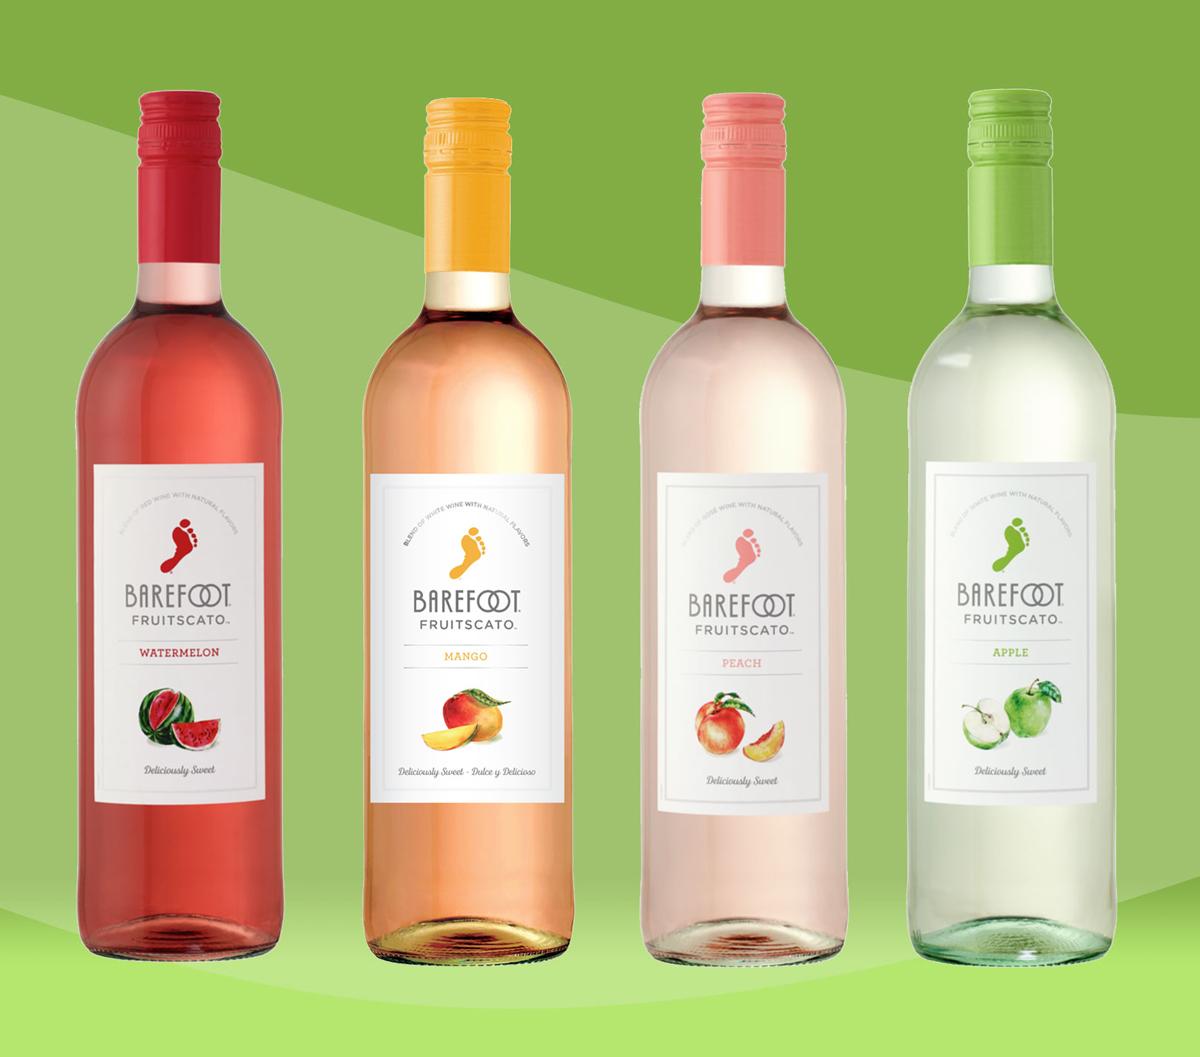 Bottle of Barefoot Wine for Free After Rebate